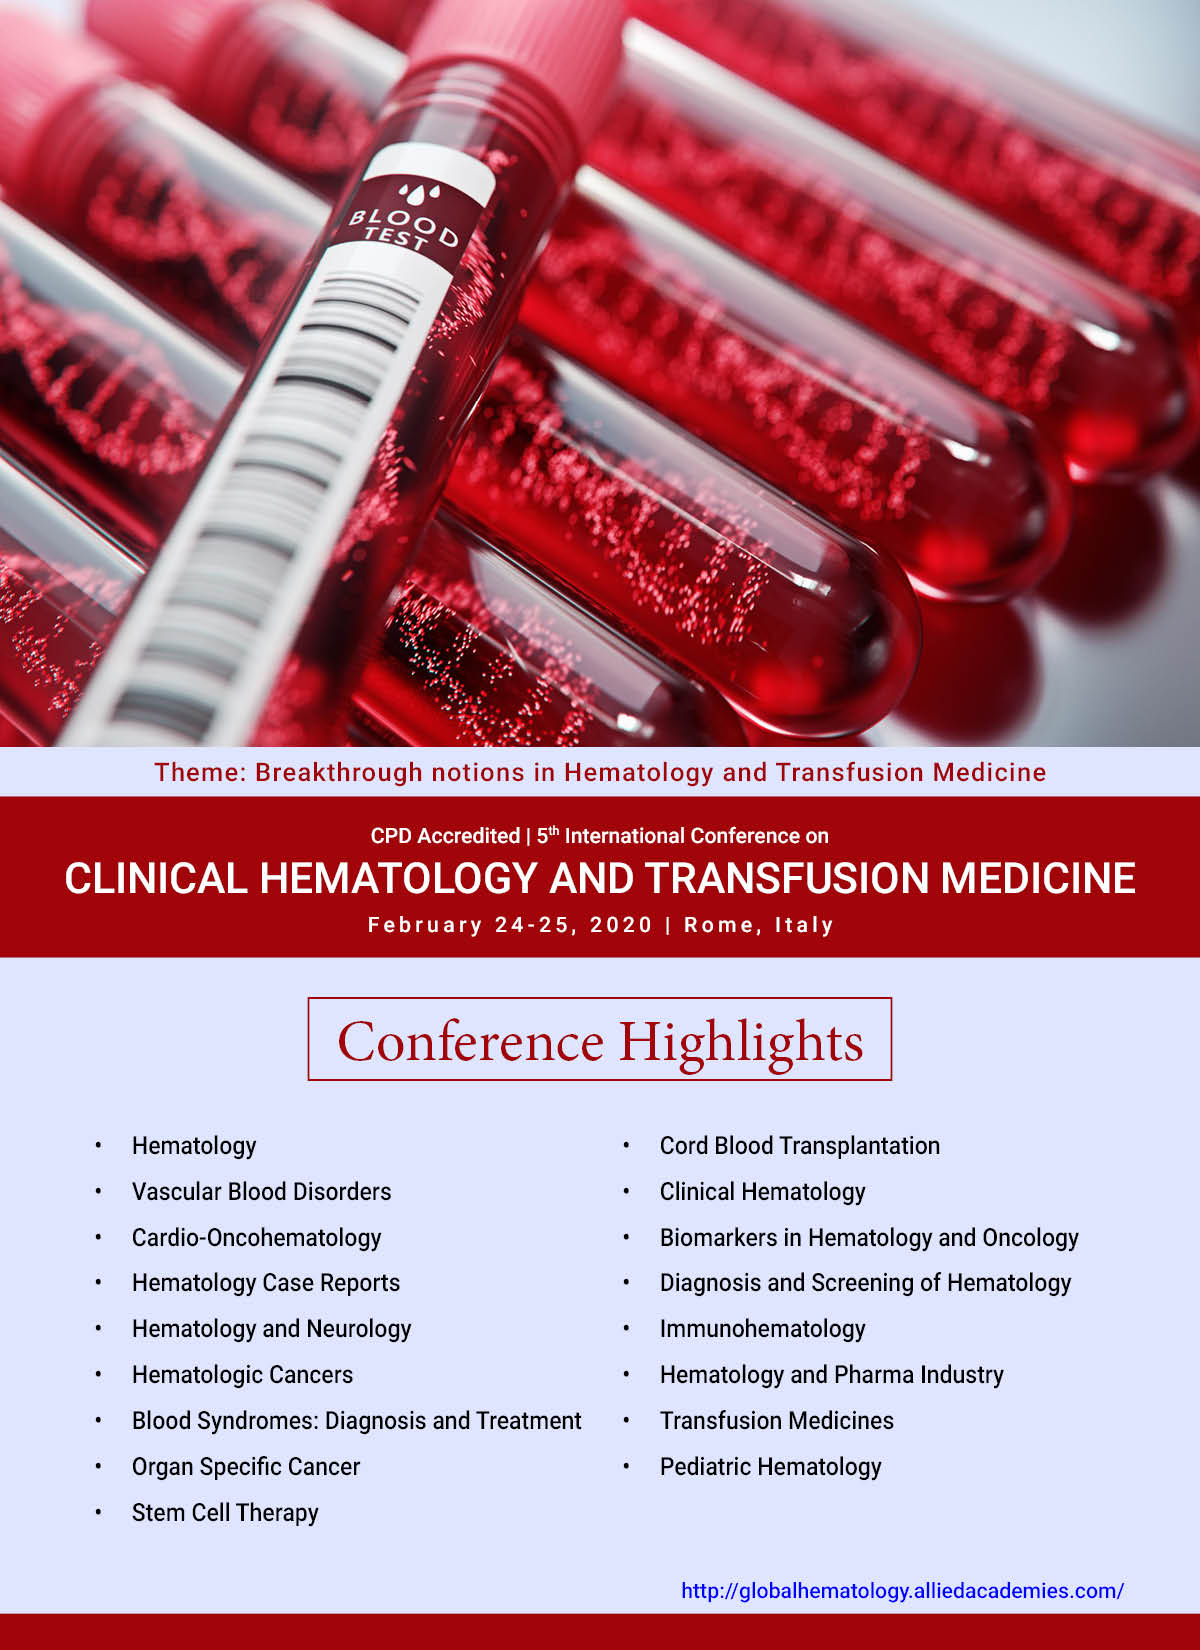 5th International Conference on Clinical Hematology and Transfusion